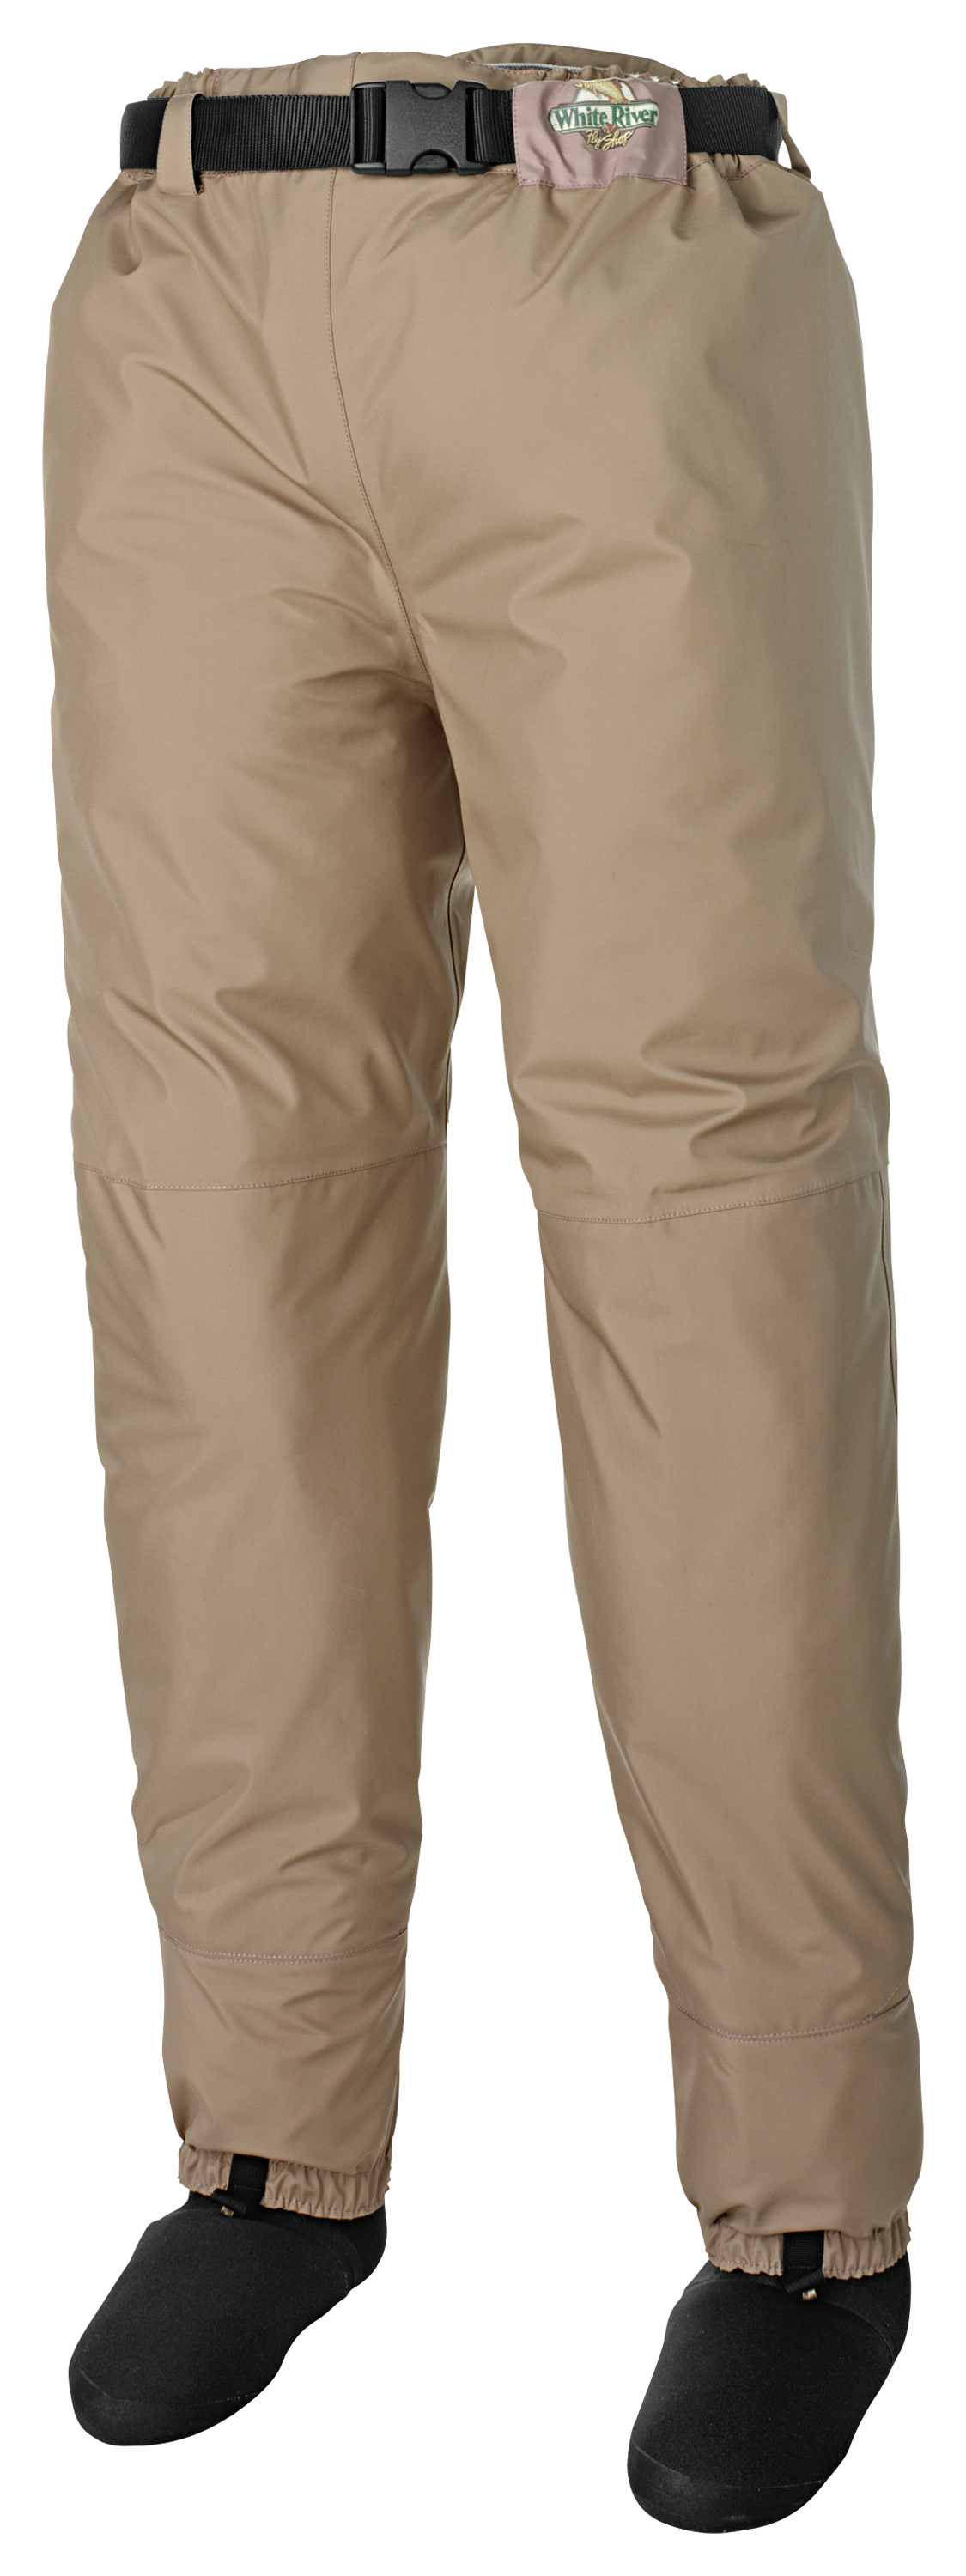 White River Fly Shop Classic Waist-High Stocking-Foot Breathable Wading ...